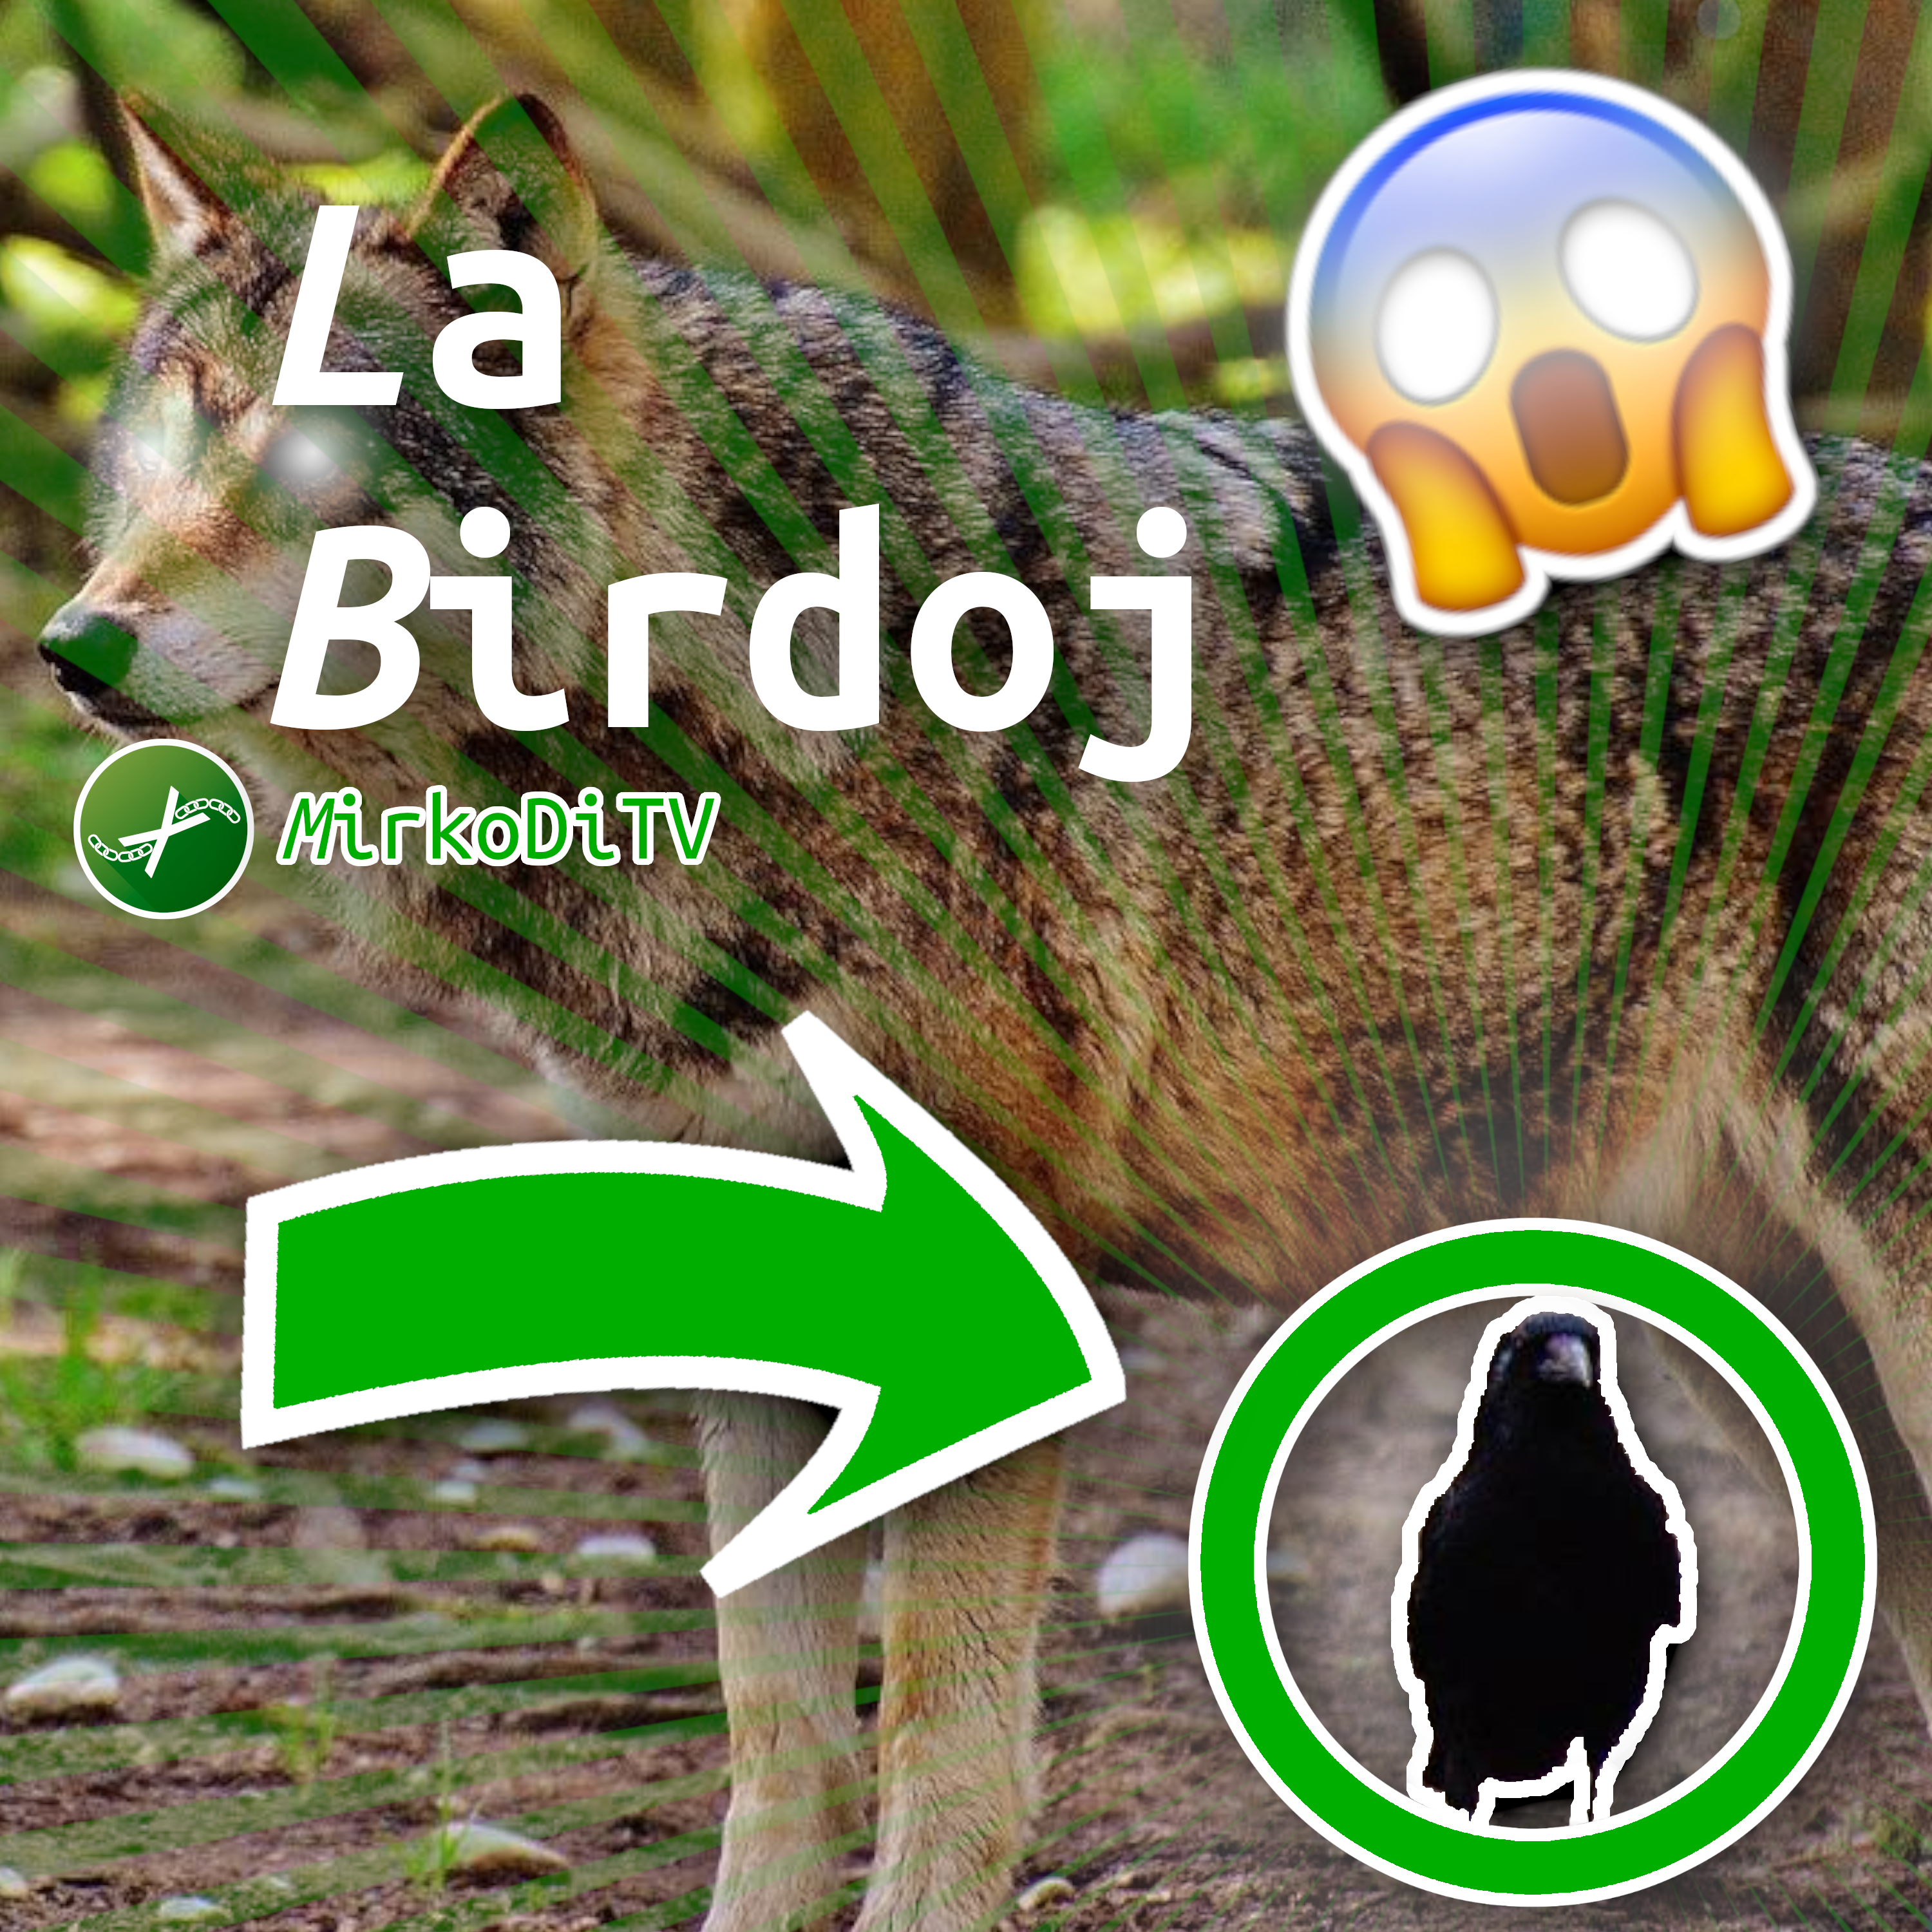 'La Birdoj',
                    'MirkoDiTV' texts on a background featuring a wolf that has
                    a bird right under it. The image resembles a 2016-era
                    YouTube clickbait thumbnail, and there's a shocked emoji to
                    top it all off.